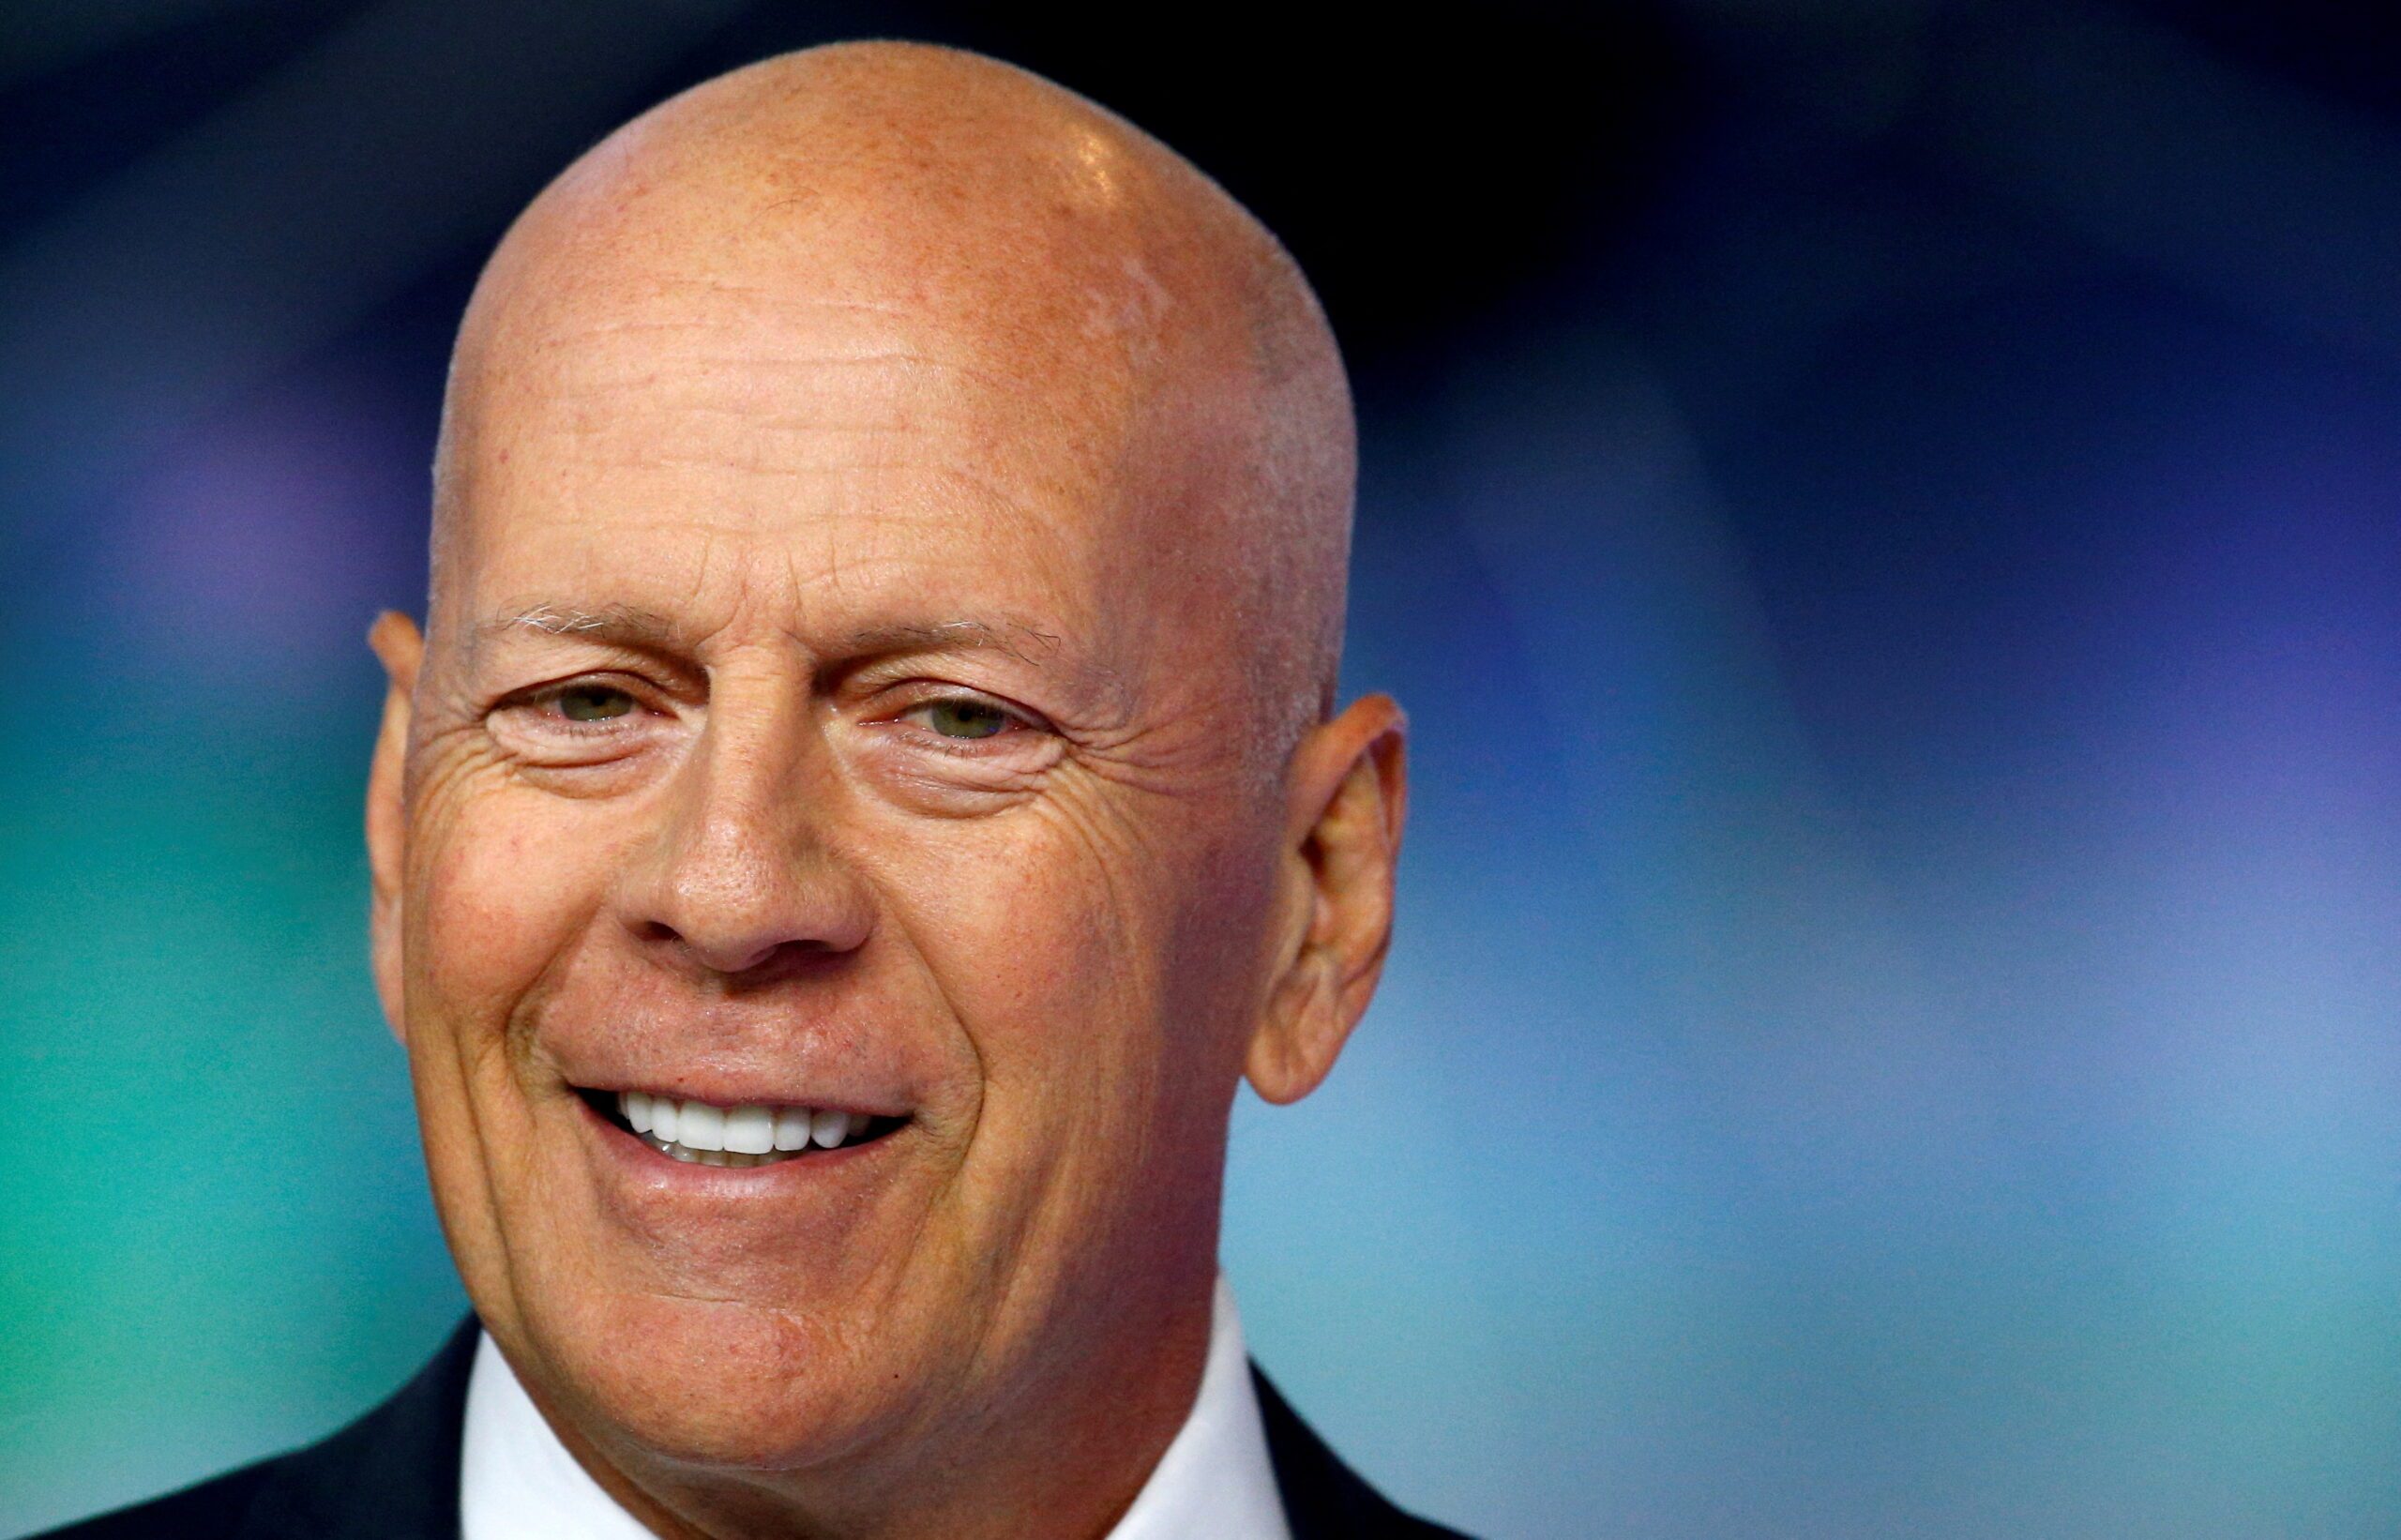 Bruce Willis has frontotemporal dementia – here’s what we know about the disease